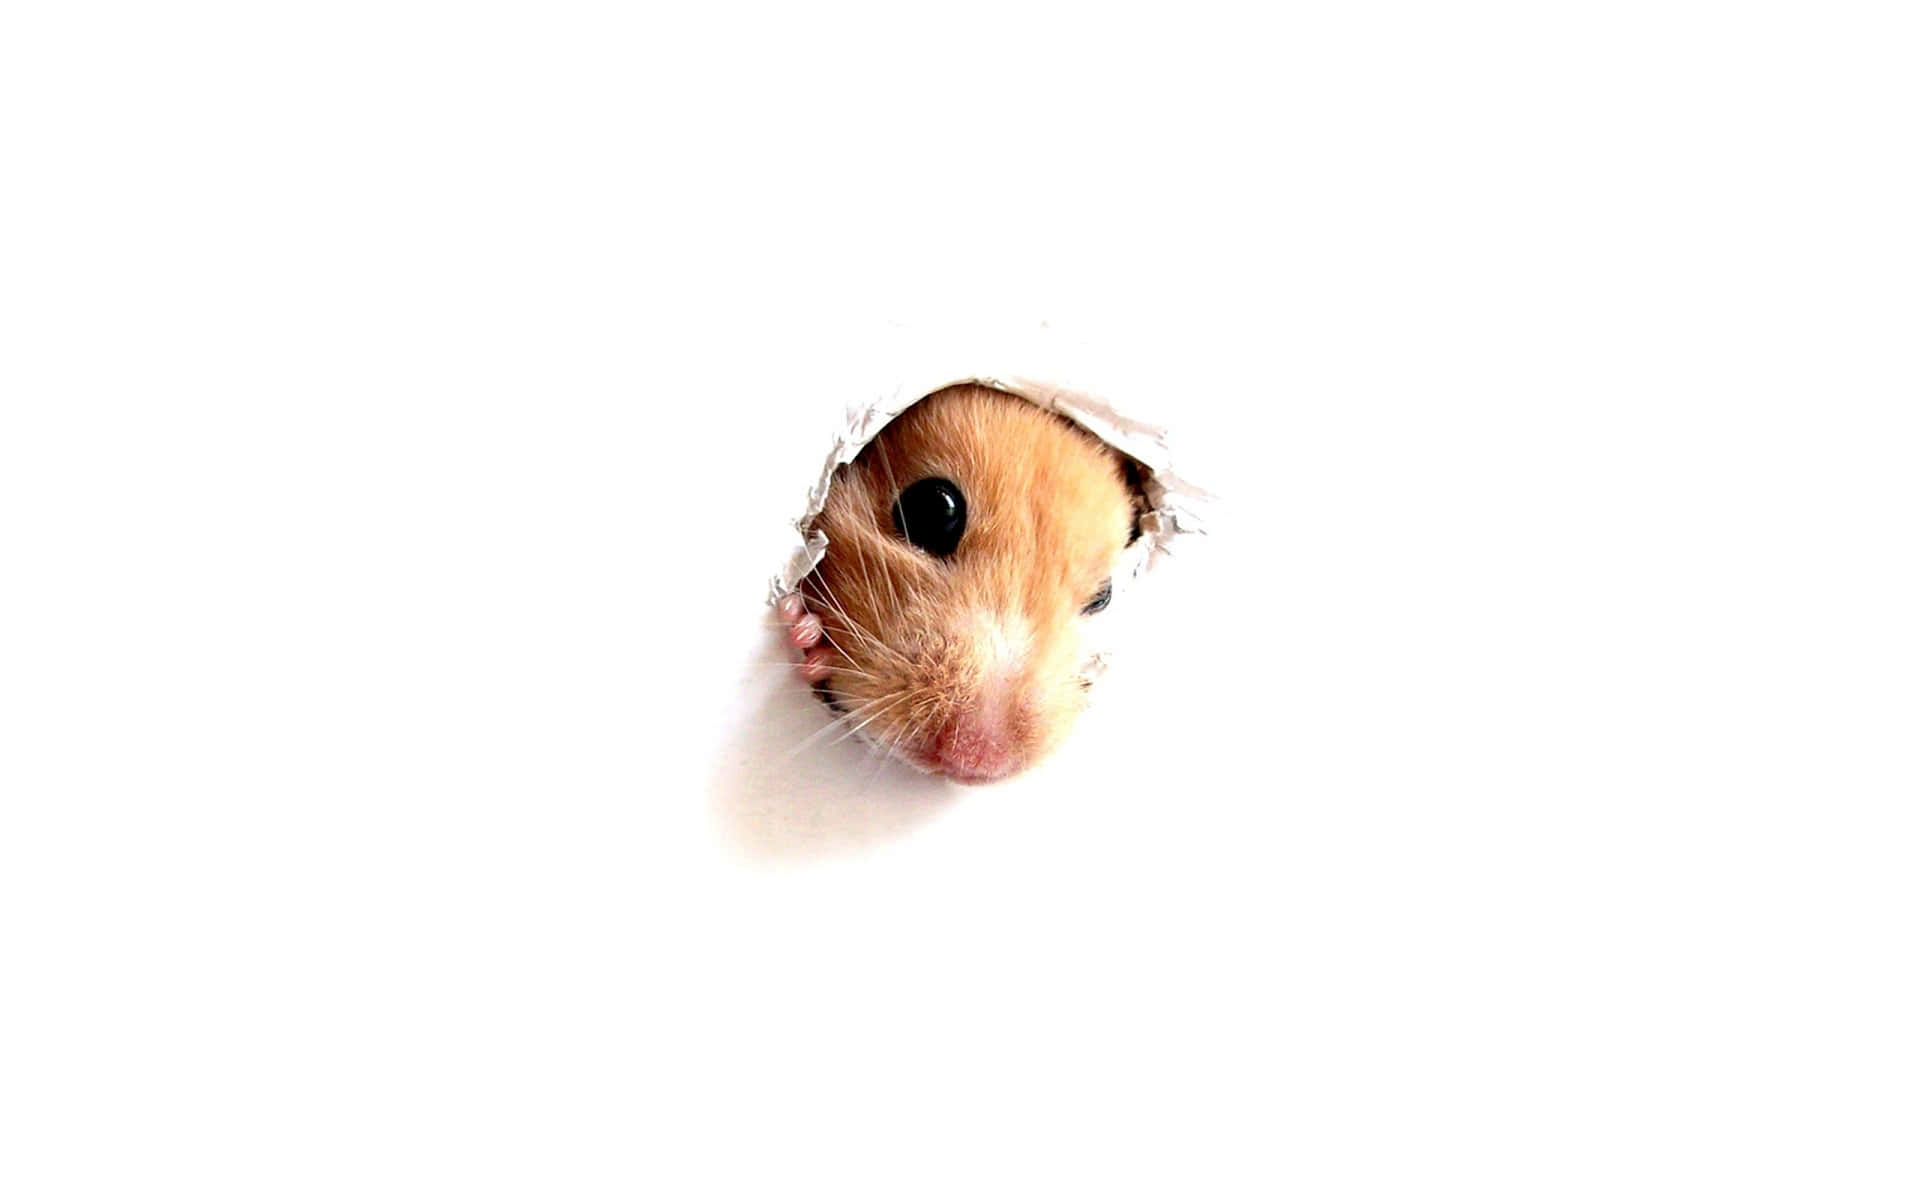 A Hamster Peeking Out Of A Hole In The Wall Background